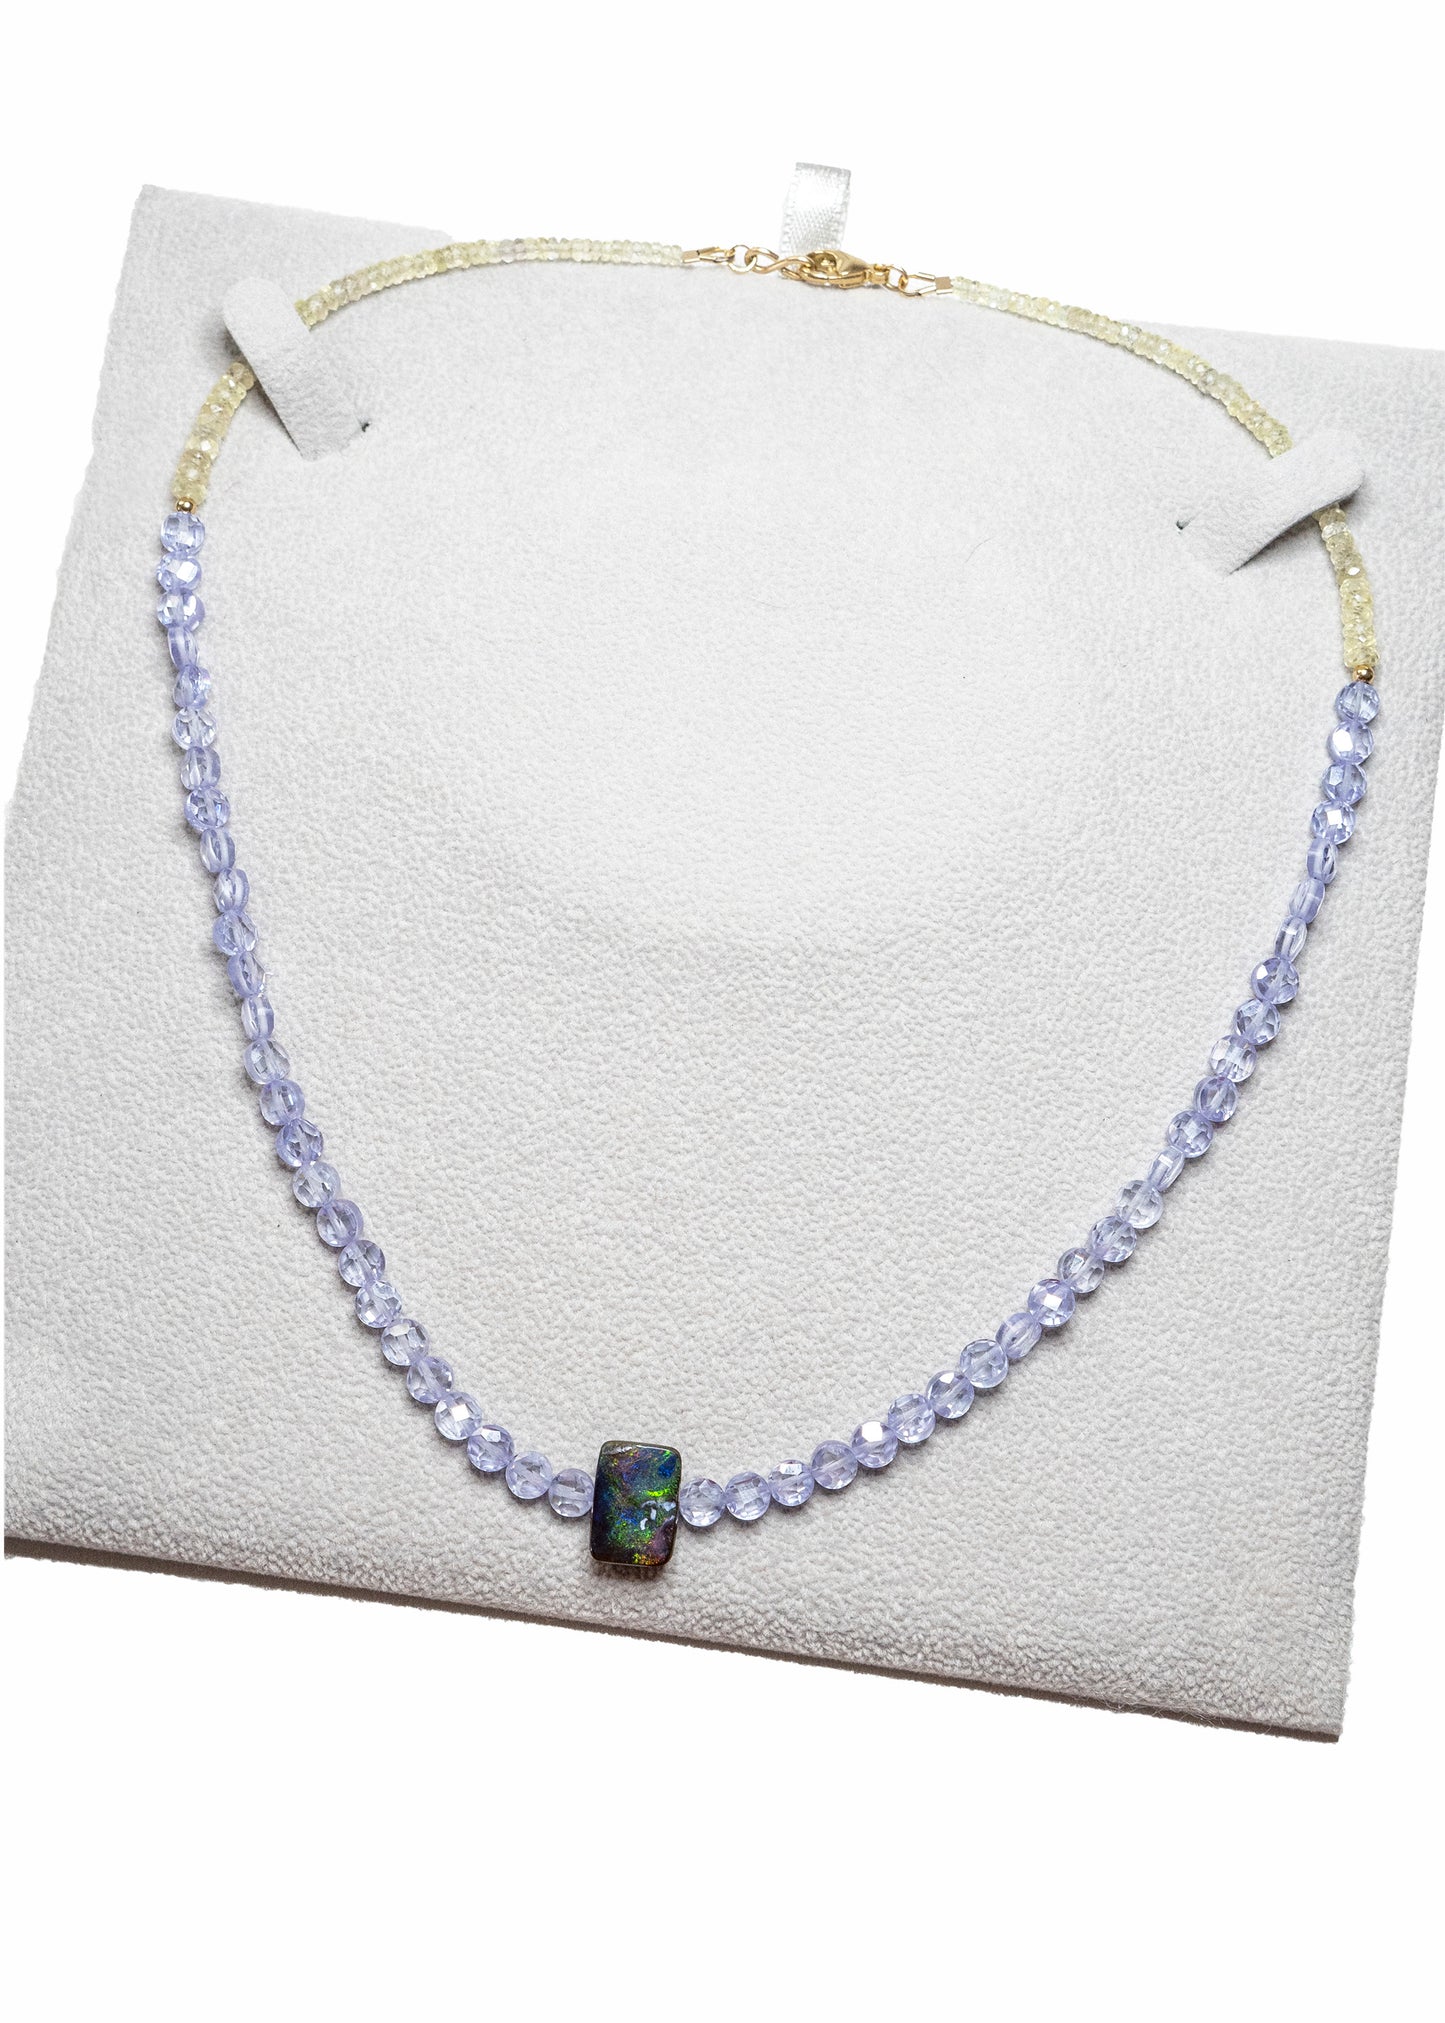 One of a Kind Boulder Opal, Zircon, and Sapphire Beaded Necklace